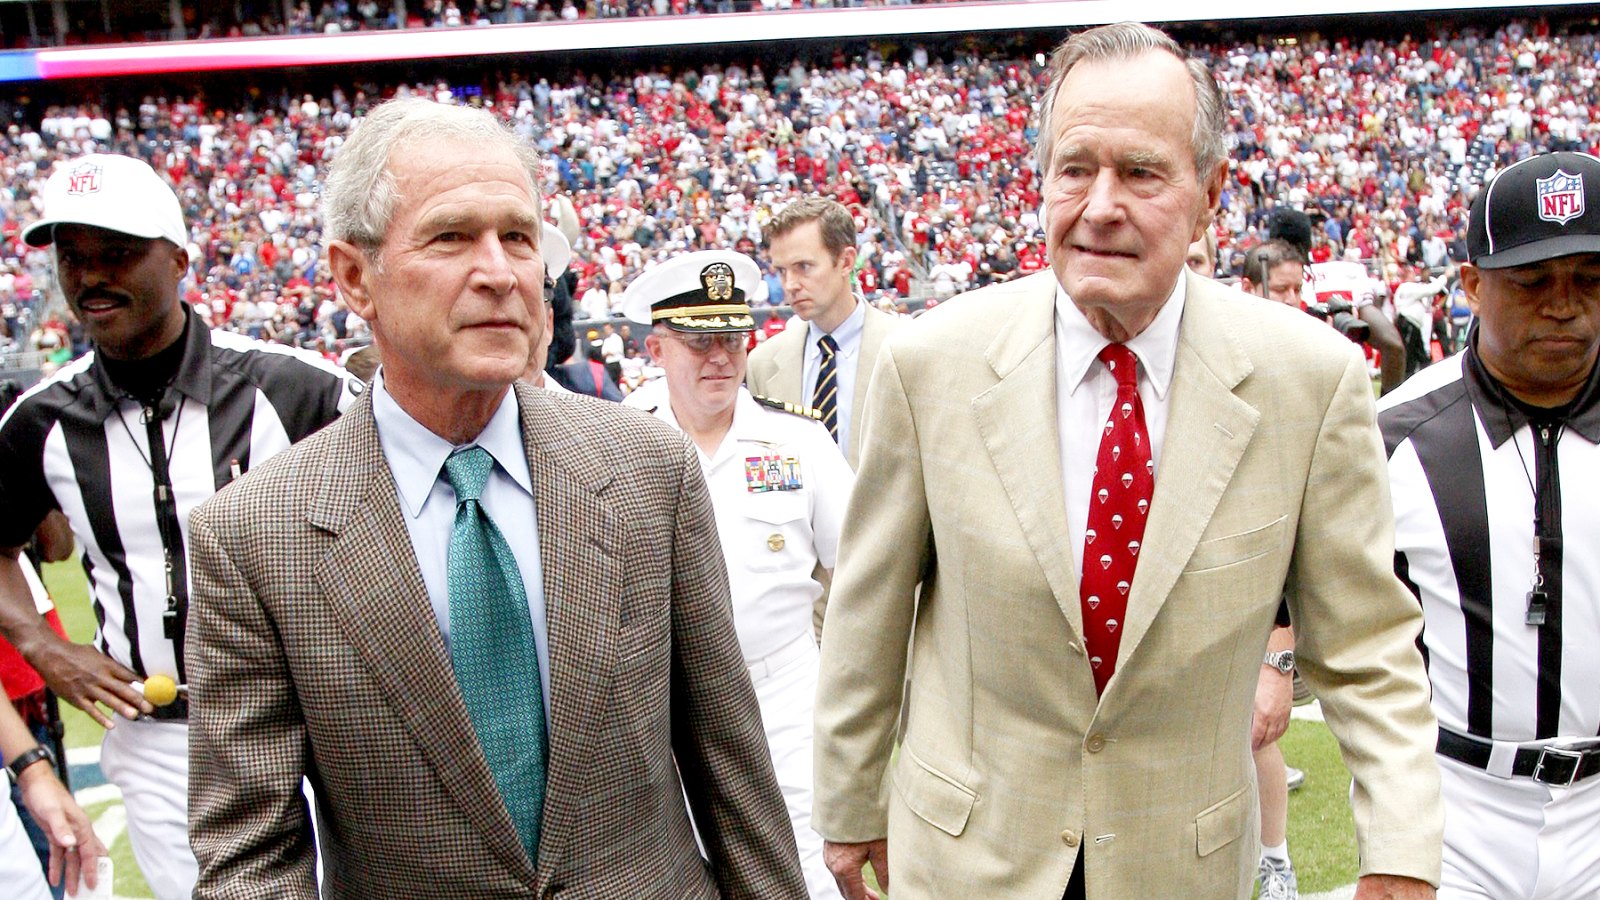 Former U.S. Presidents George W. Bush and George H.W. Bush at the San Francisco 49ers and Houston Texans game at Reliant Stadium in Houston on October 25, 2009.